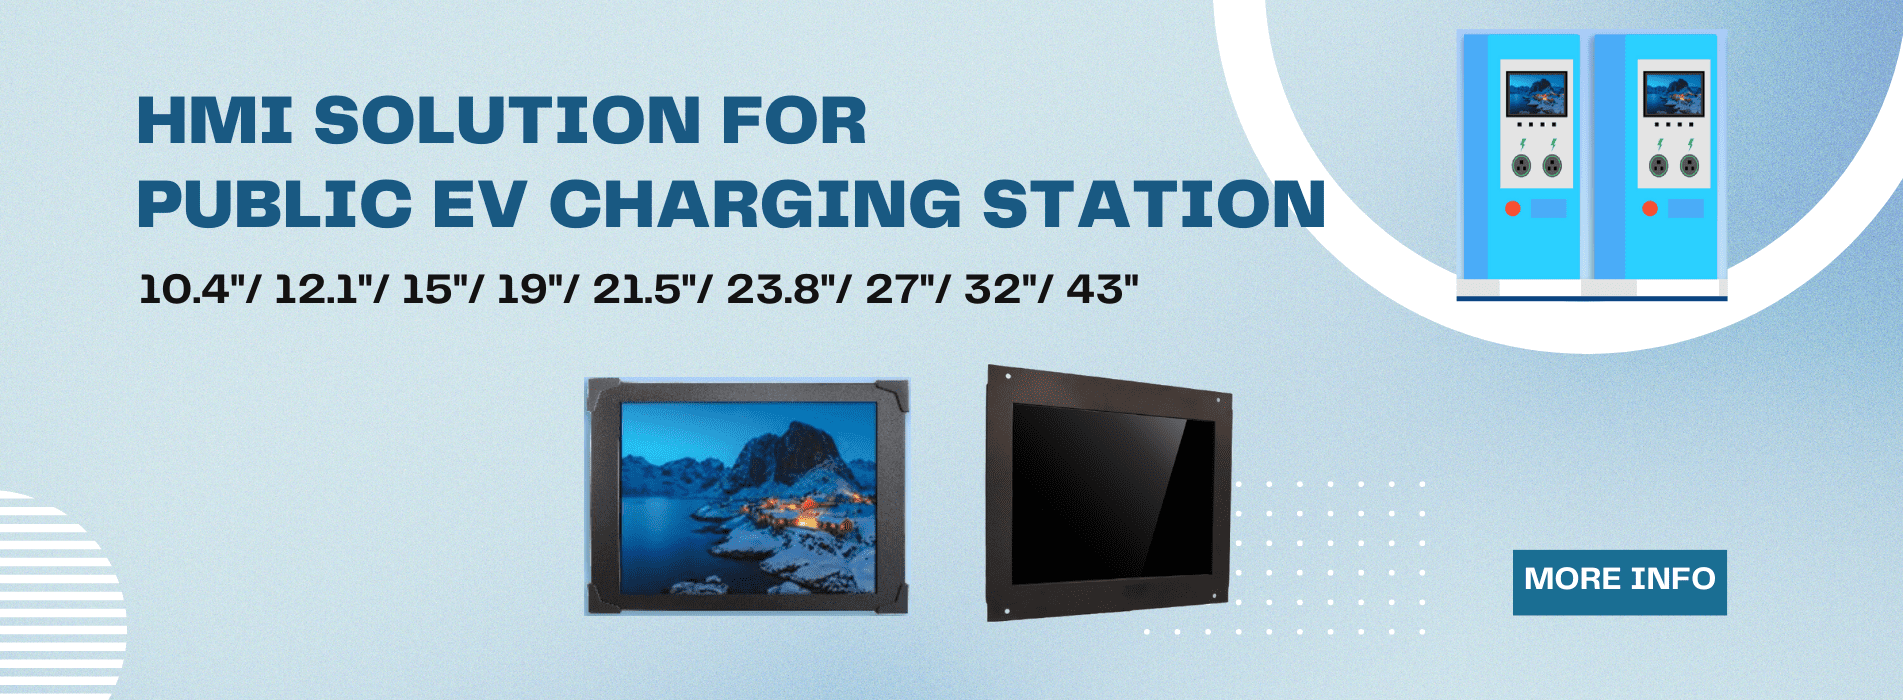 HMI solution for ev charging public station. Outdoor high-brightness touch monitor.